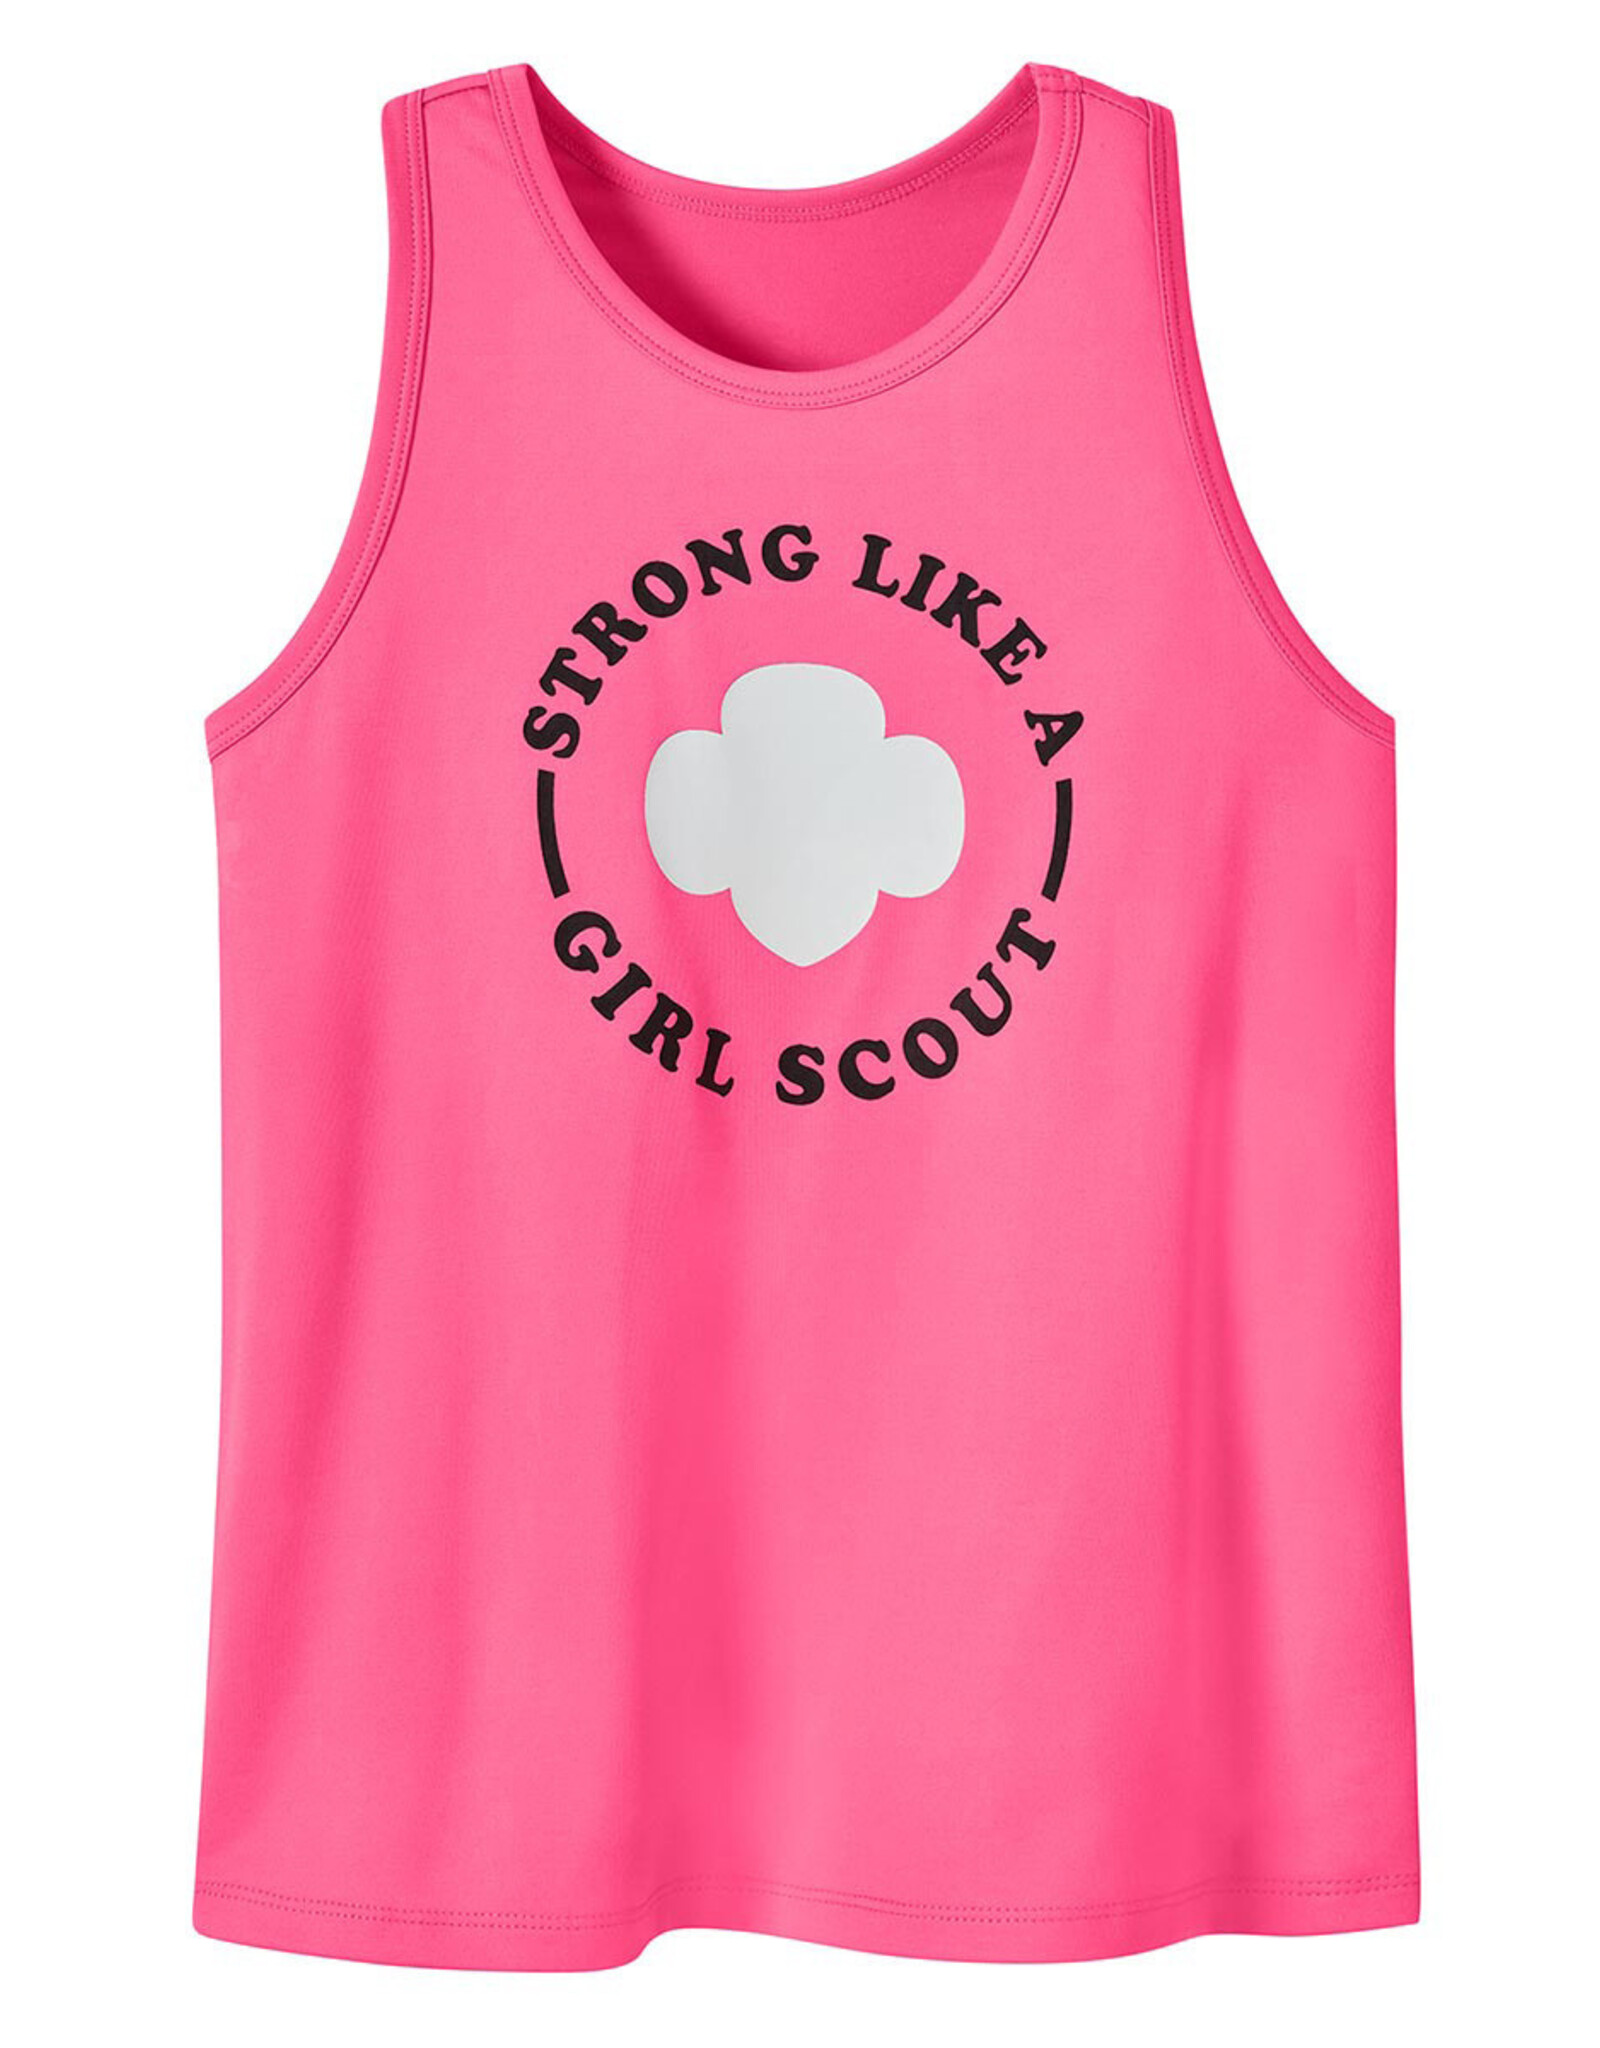 GSUSA Girls Strong Like a GS Active Tank Top